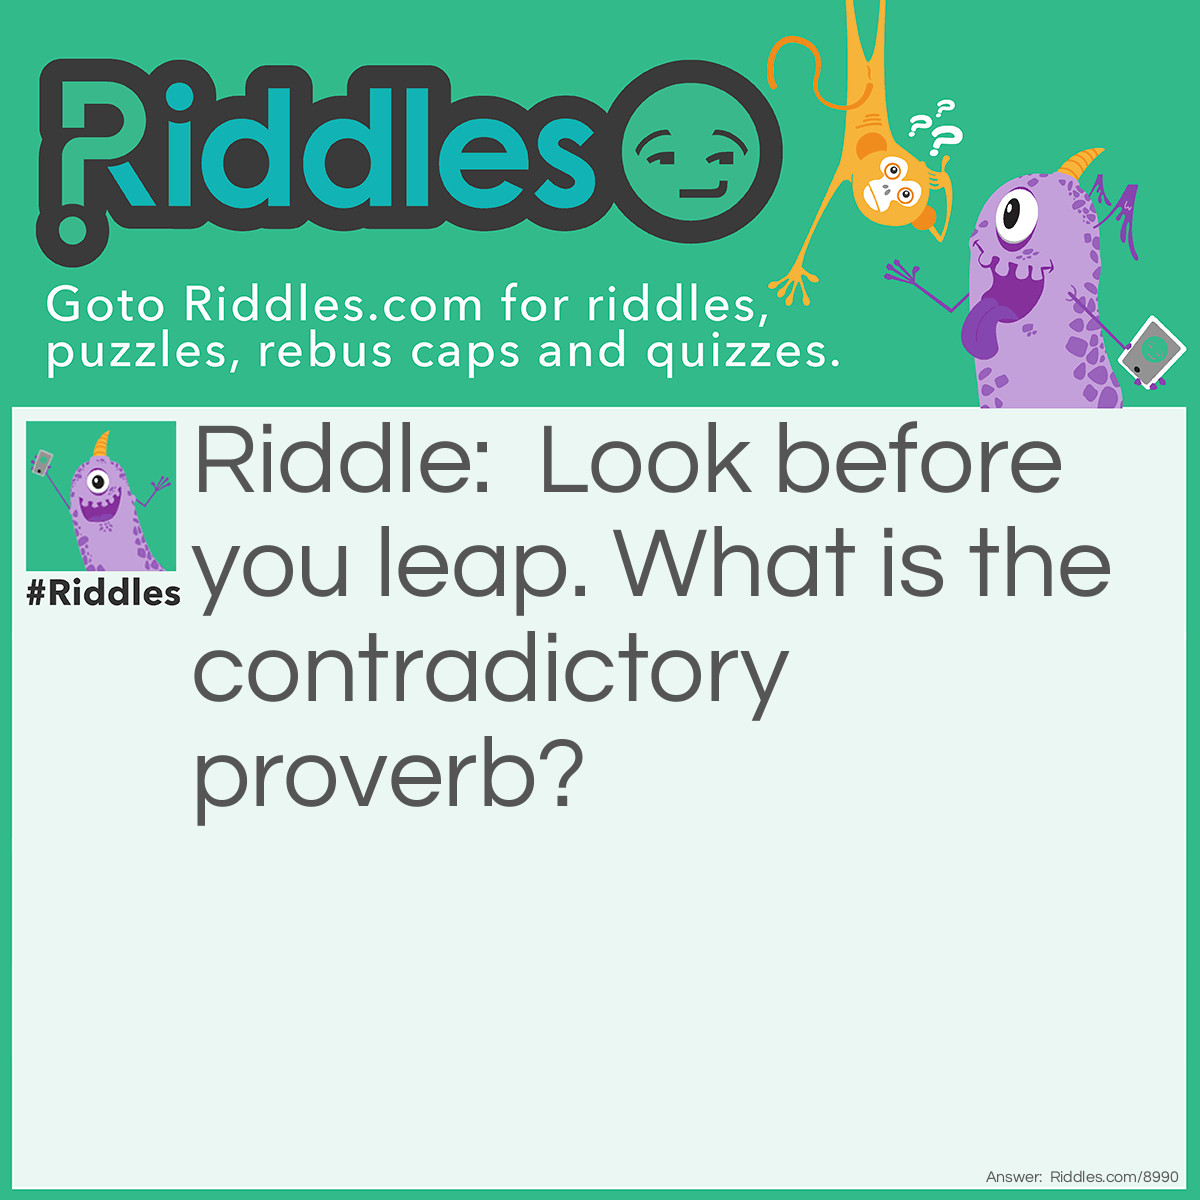 Riddle: Look before you leap. What is the contradictory proverb? Answer: He who hesitates is lost.